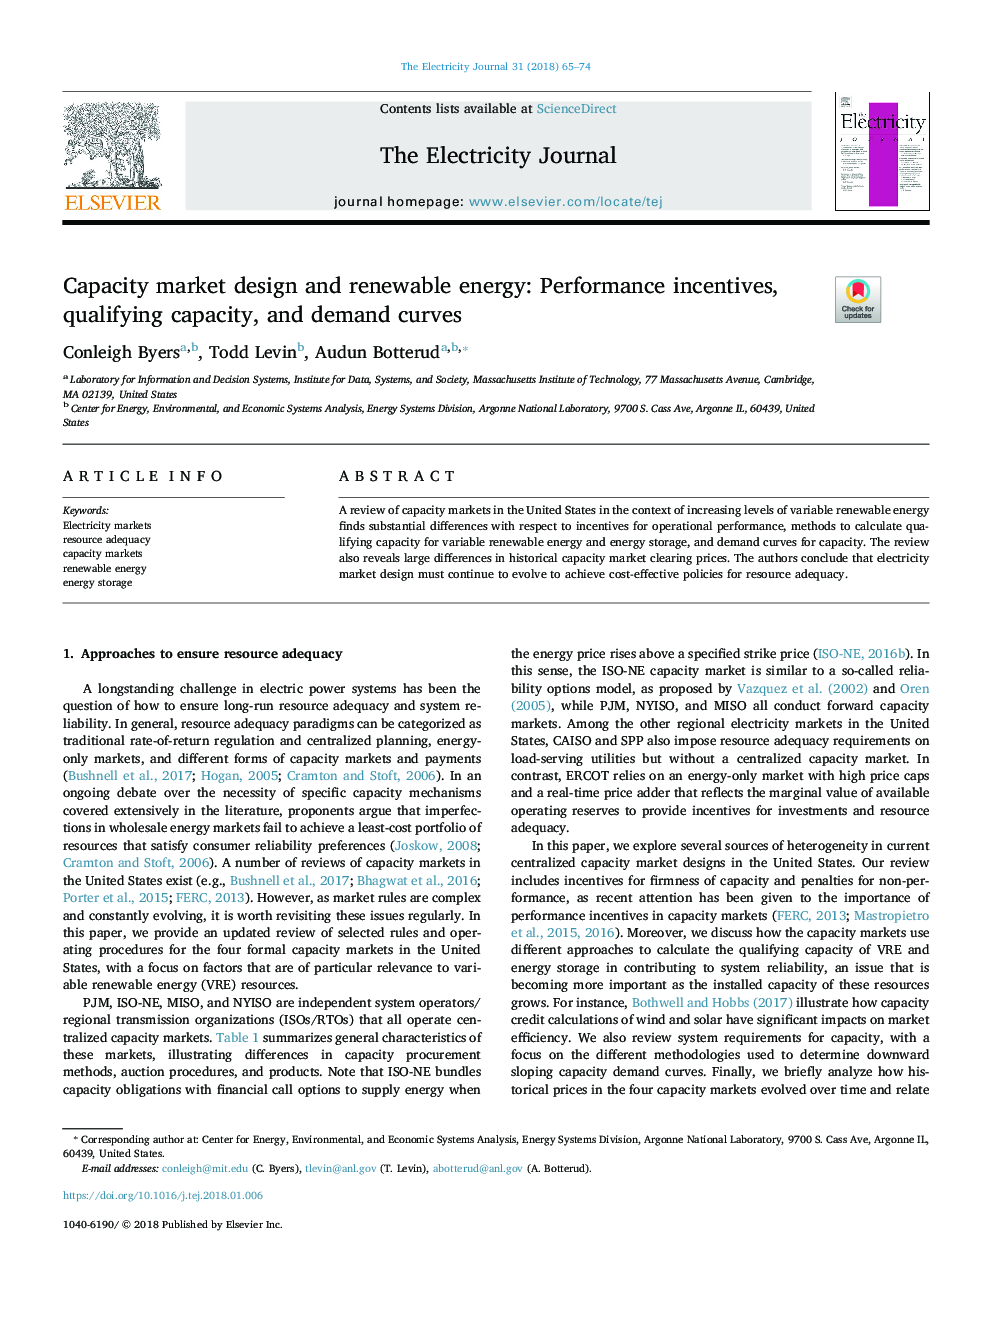 Capacity market design and renewable energy: Performance incentives, qualifying capacity, and demand curves